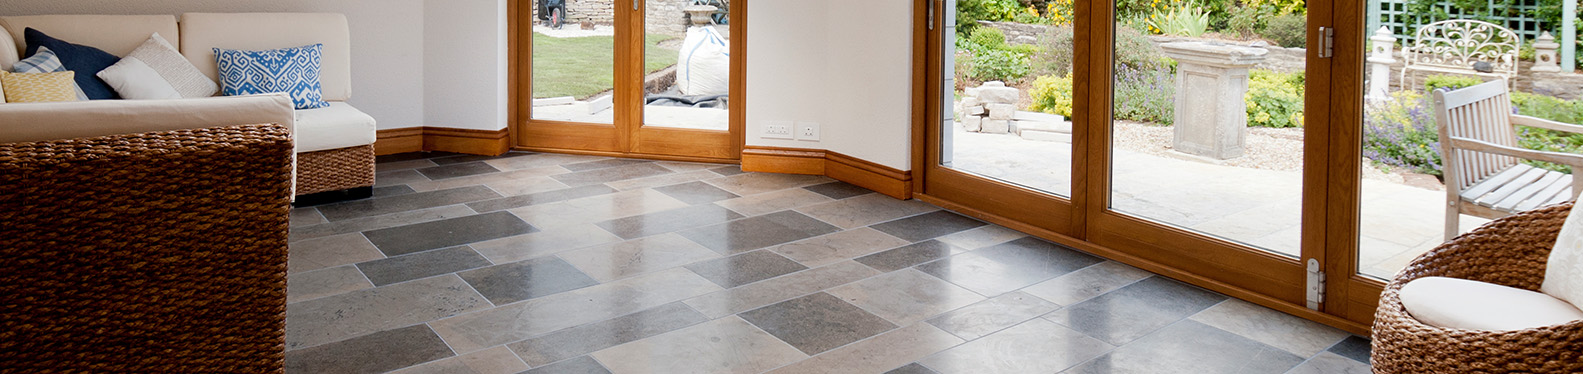 Suttle Purbeck Stone for Flooring